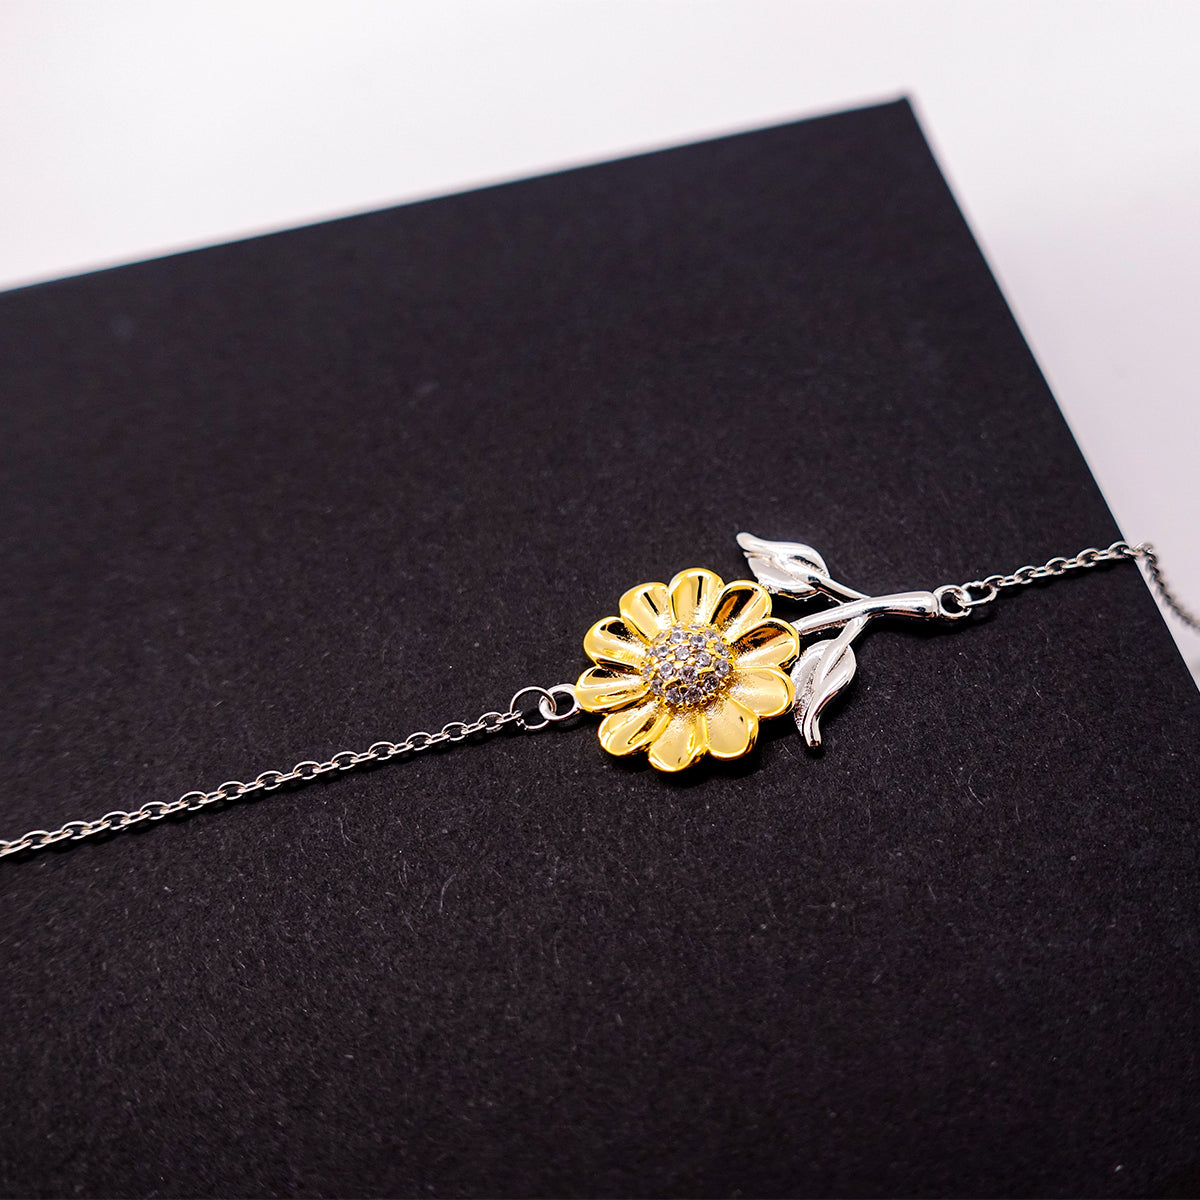 Nonno Sunflower Bracelet Gift for Grandfather Youll Always Hold a Special Place in My Heart Memorial Jewelry Keepsake for Birthday Christmas Veterans Day